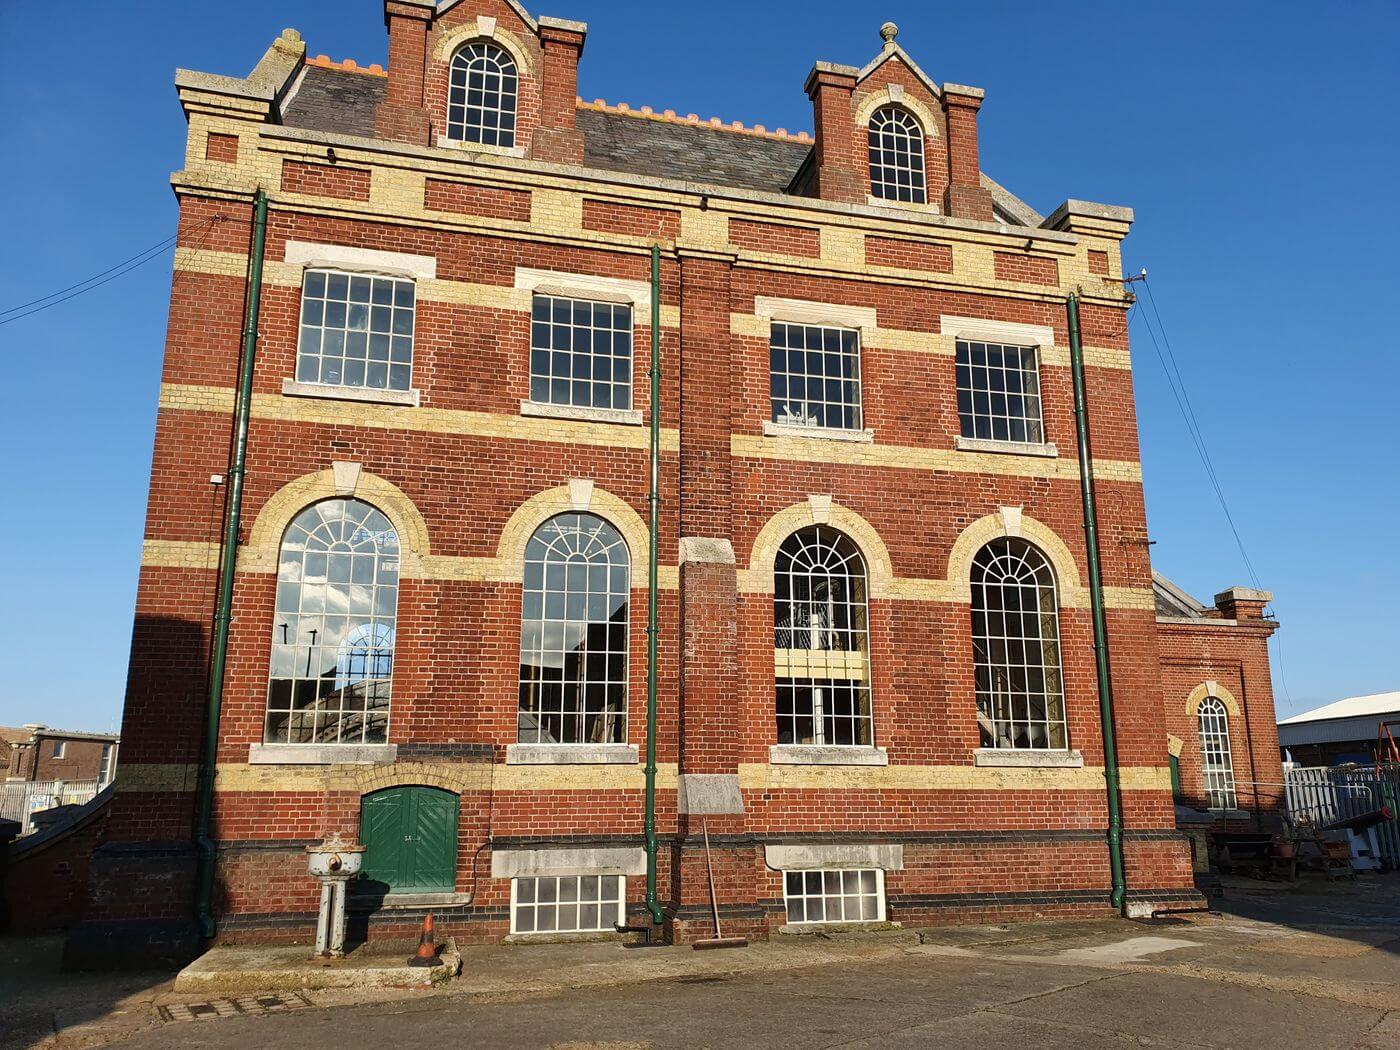 Eastney Pumping Station